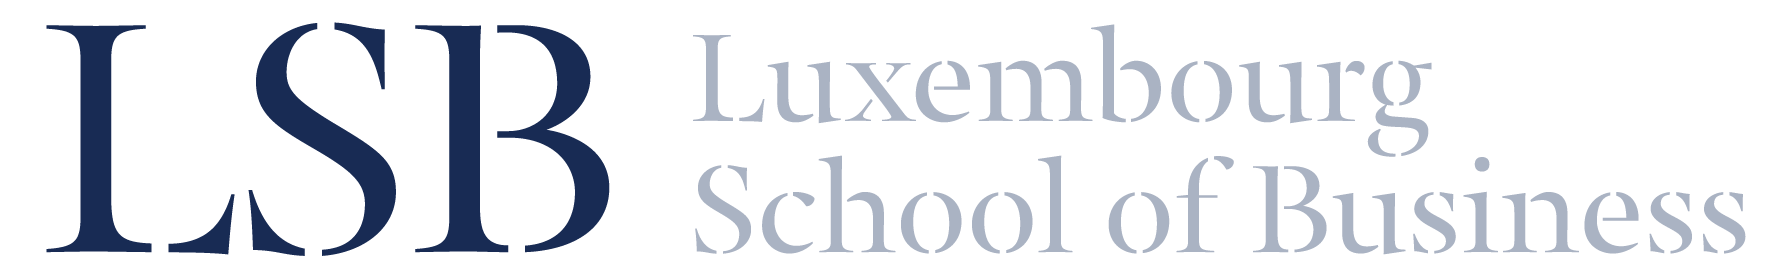 Luxembourg School of Business logo